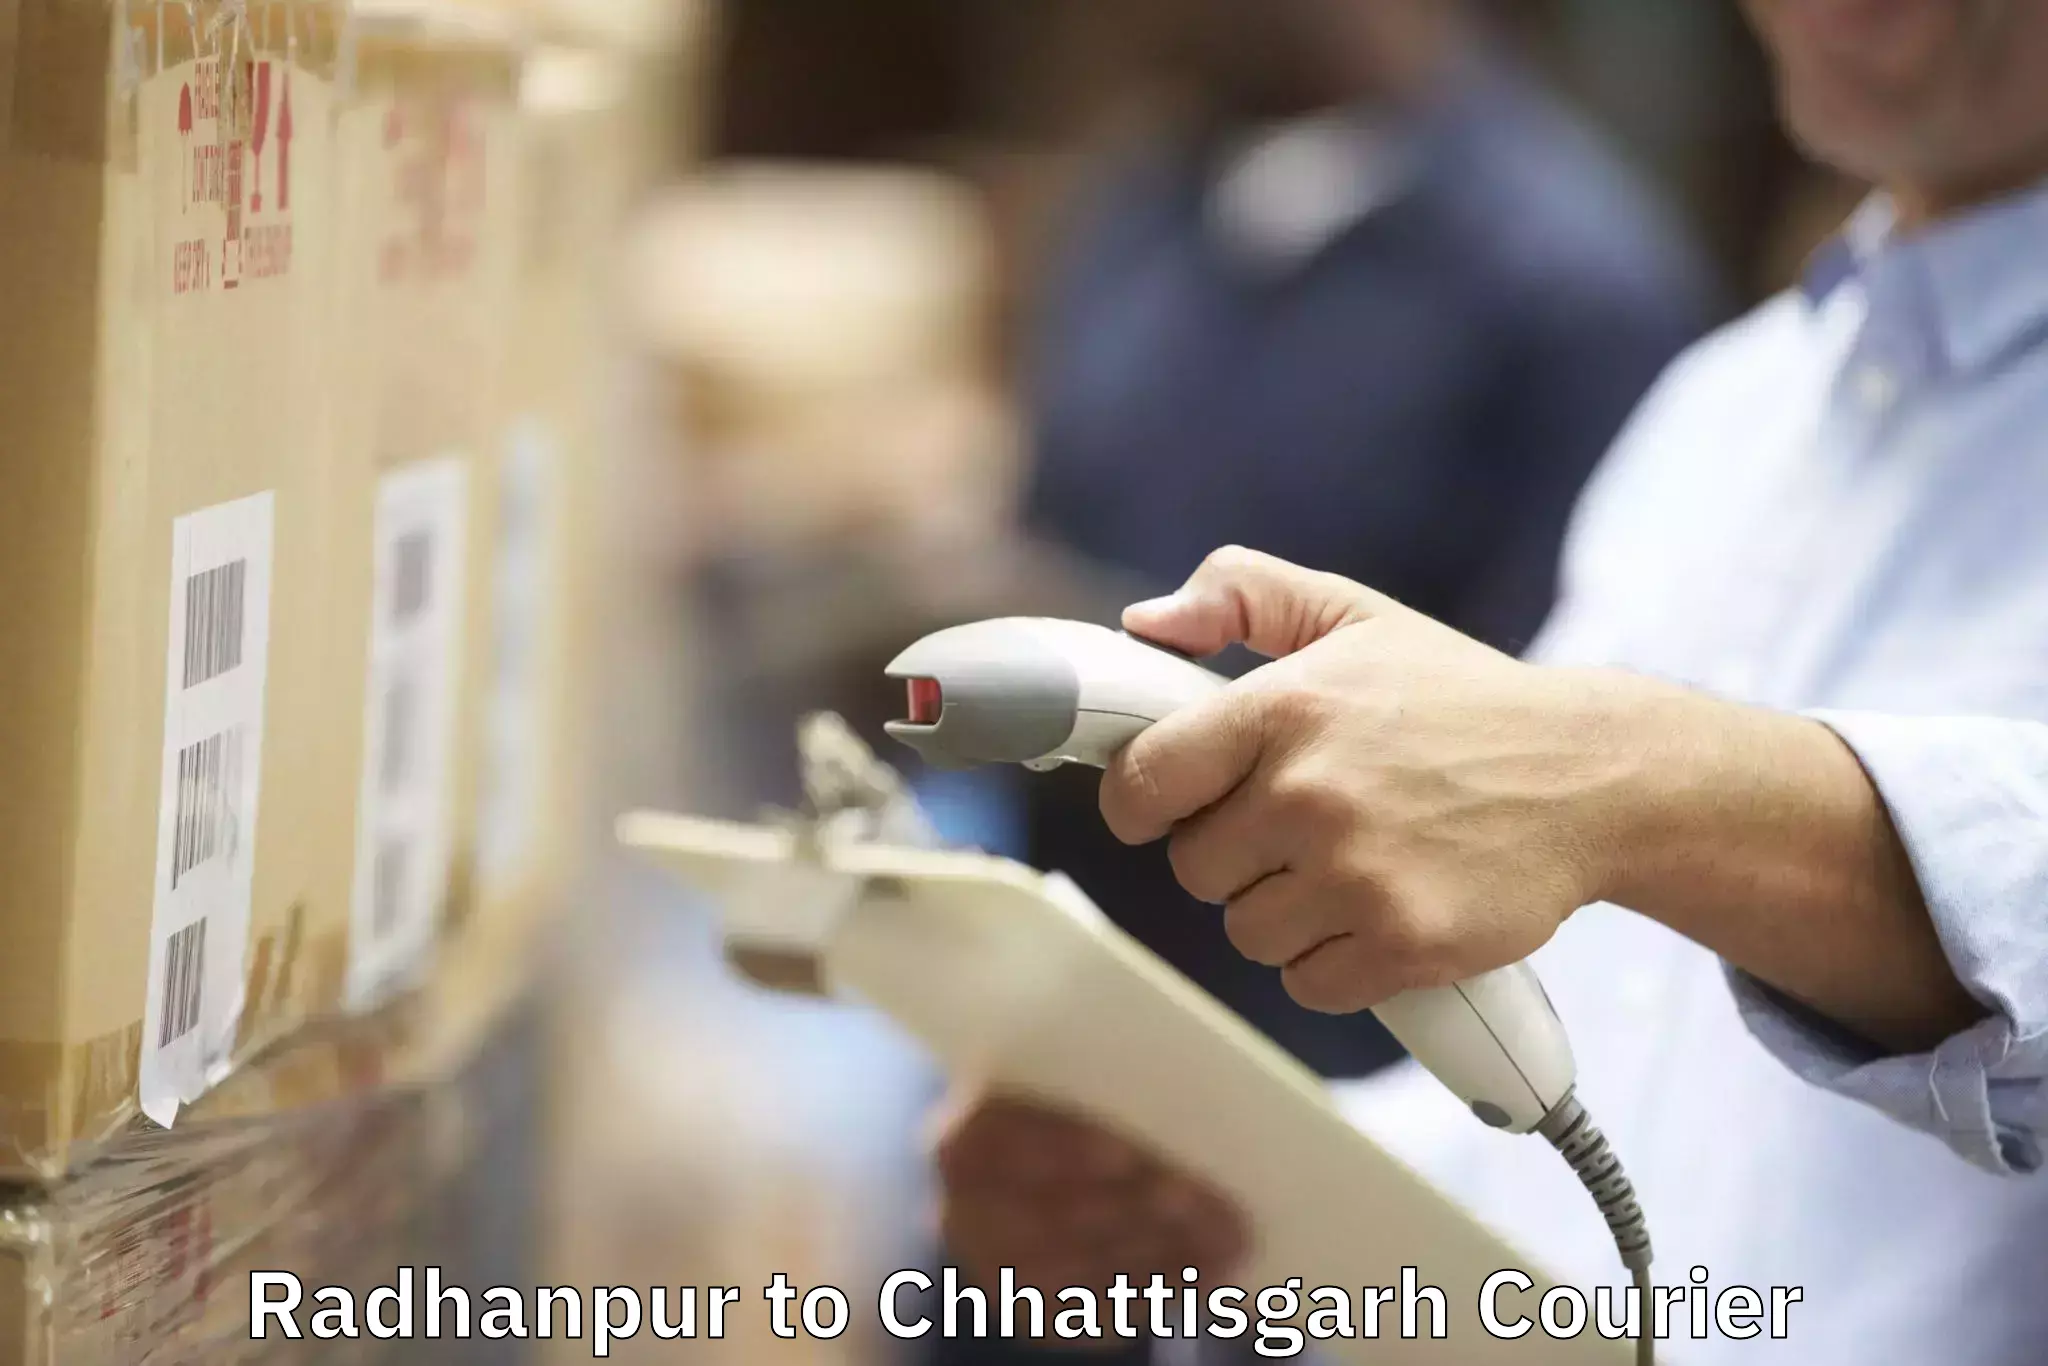 Affordable relocation services Radhanpur to Patna Chhattisgarh